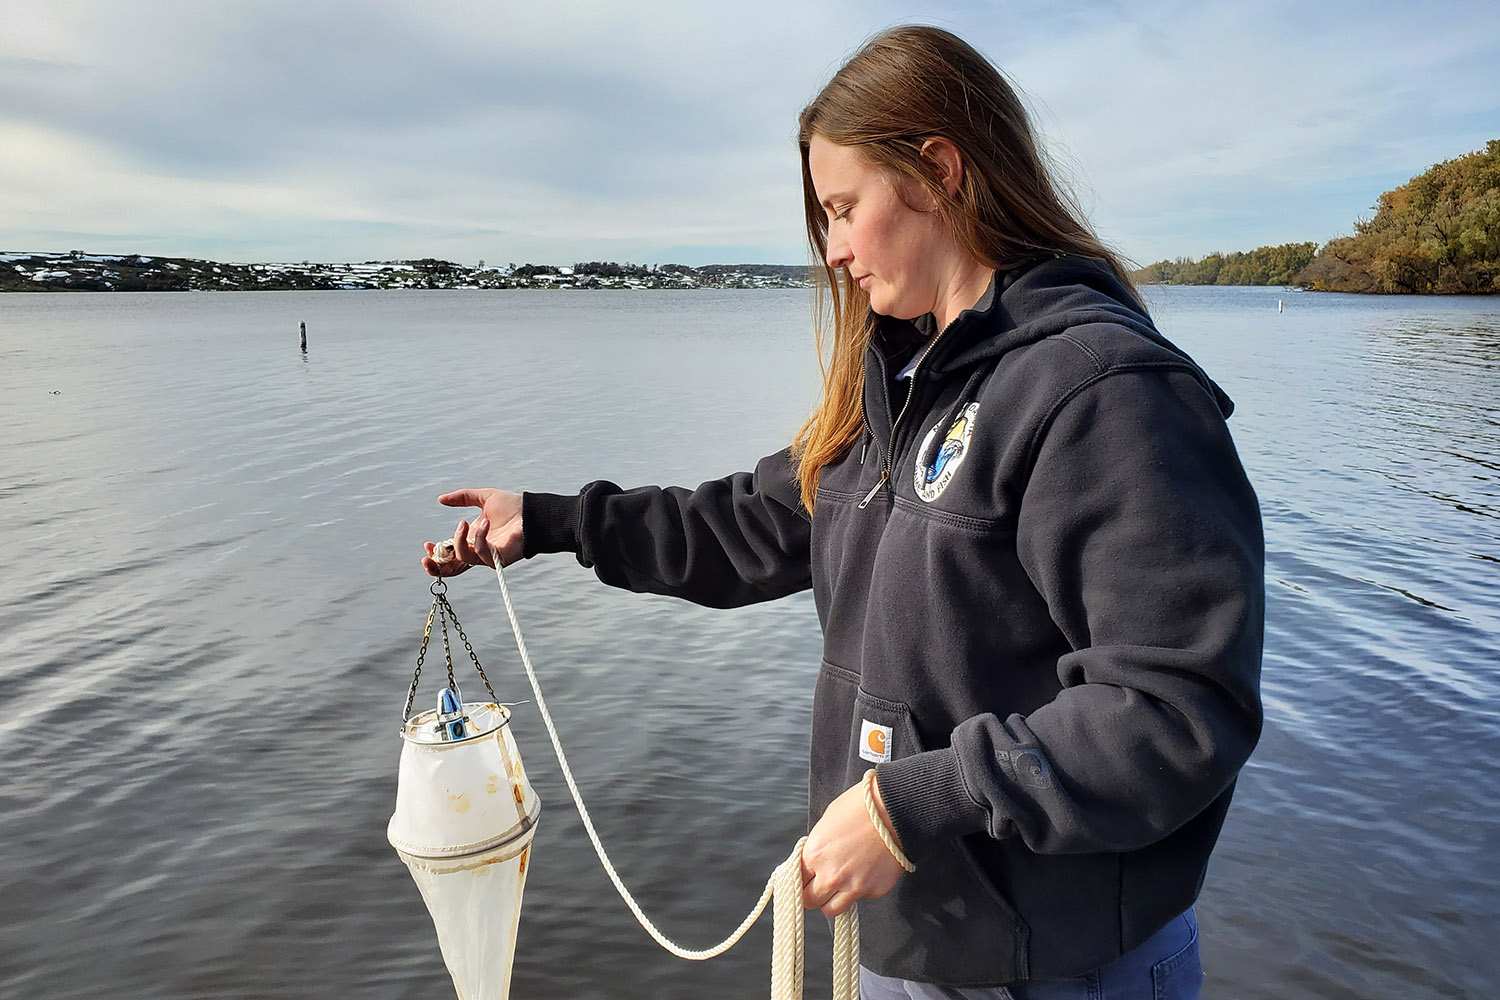 Staff testing water sample for zebra mussels